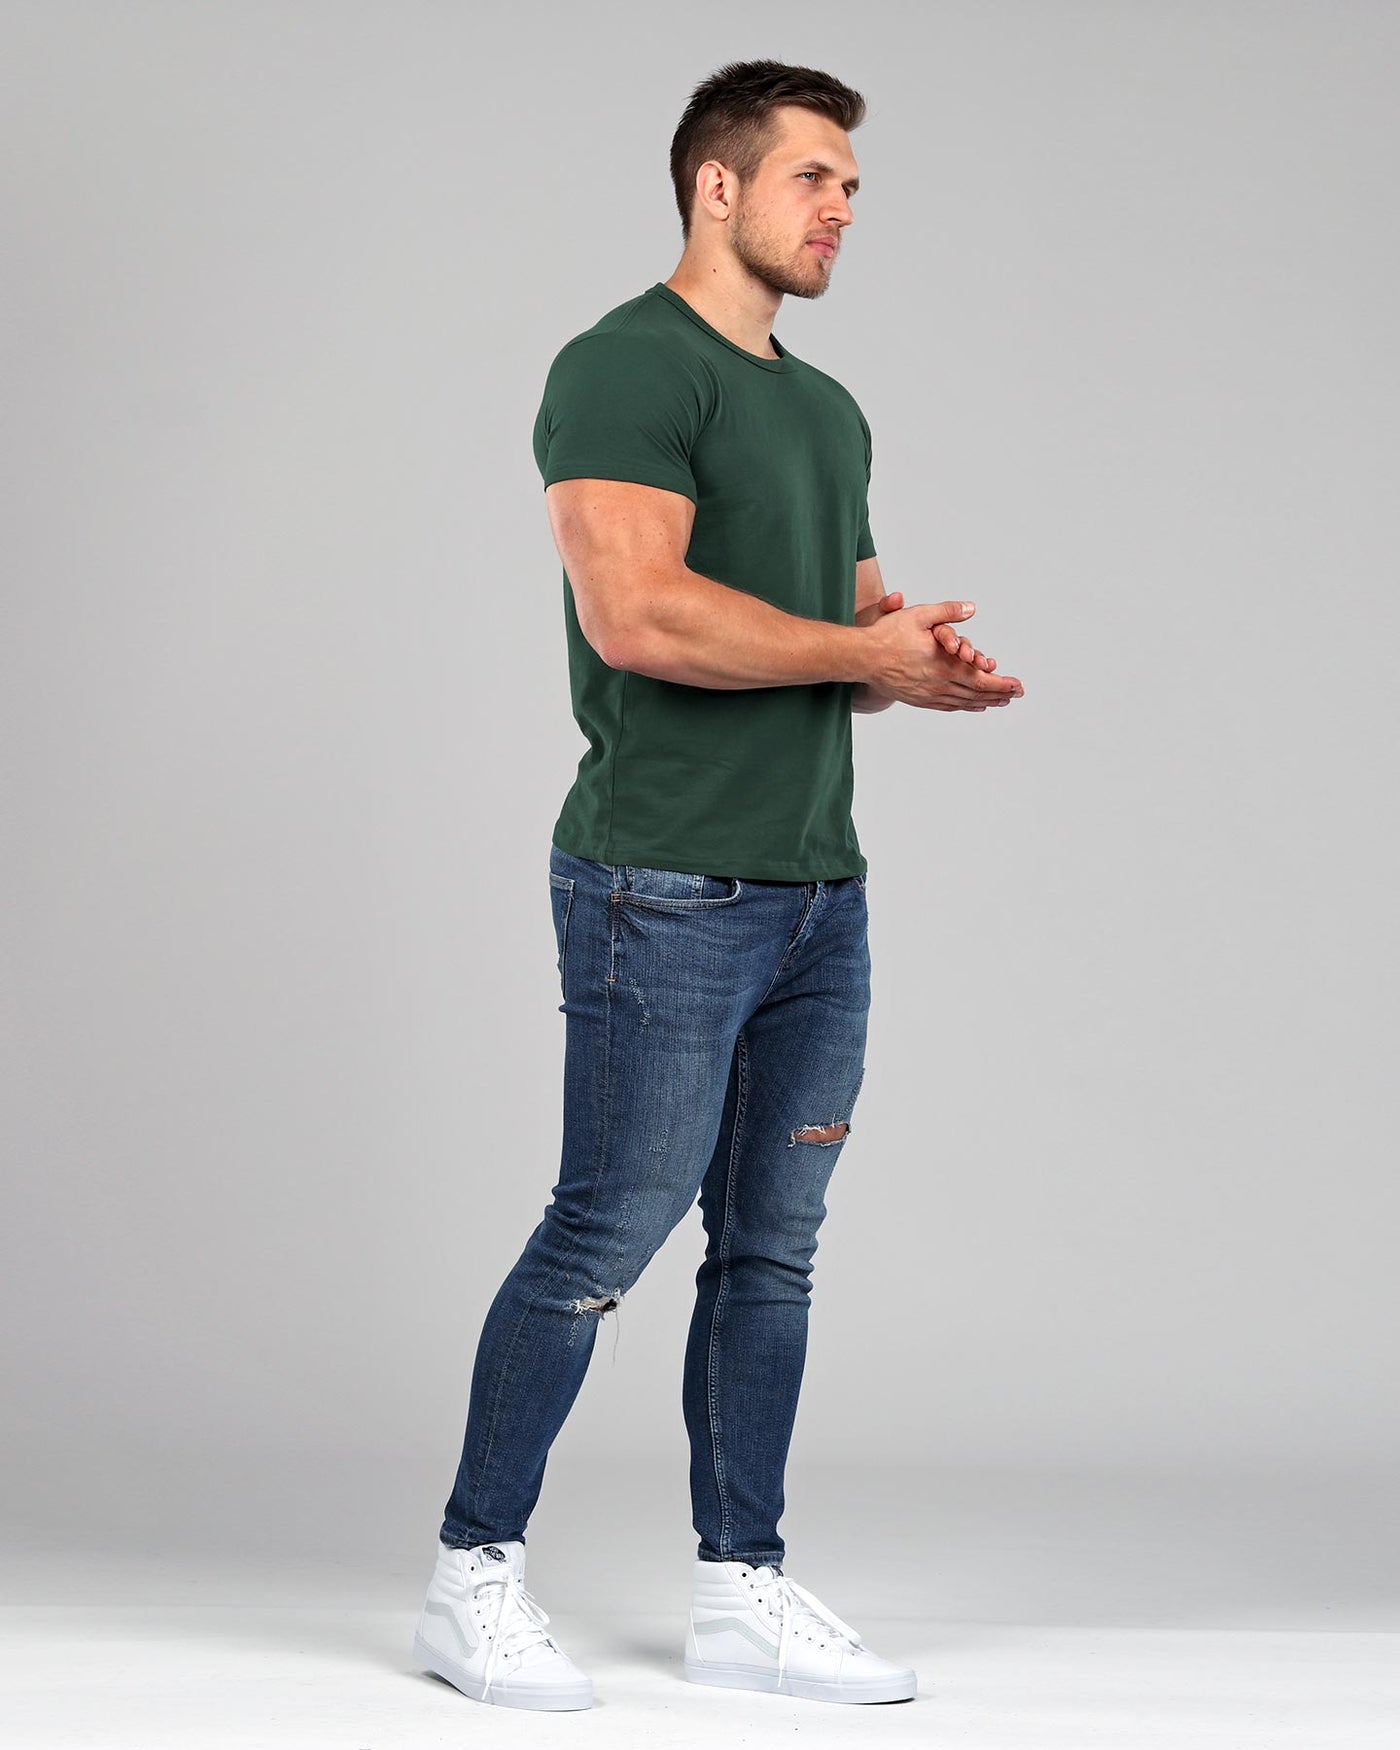 Crew Basic Muscle Fitted Plain T-Shirt - Dark Green - Muscle Fit Basics - 2